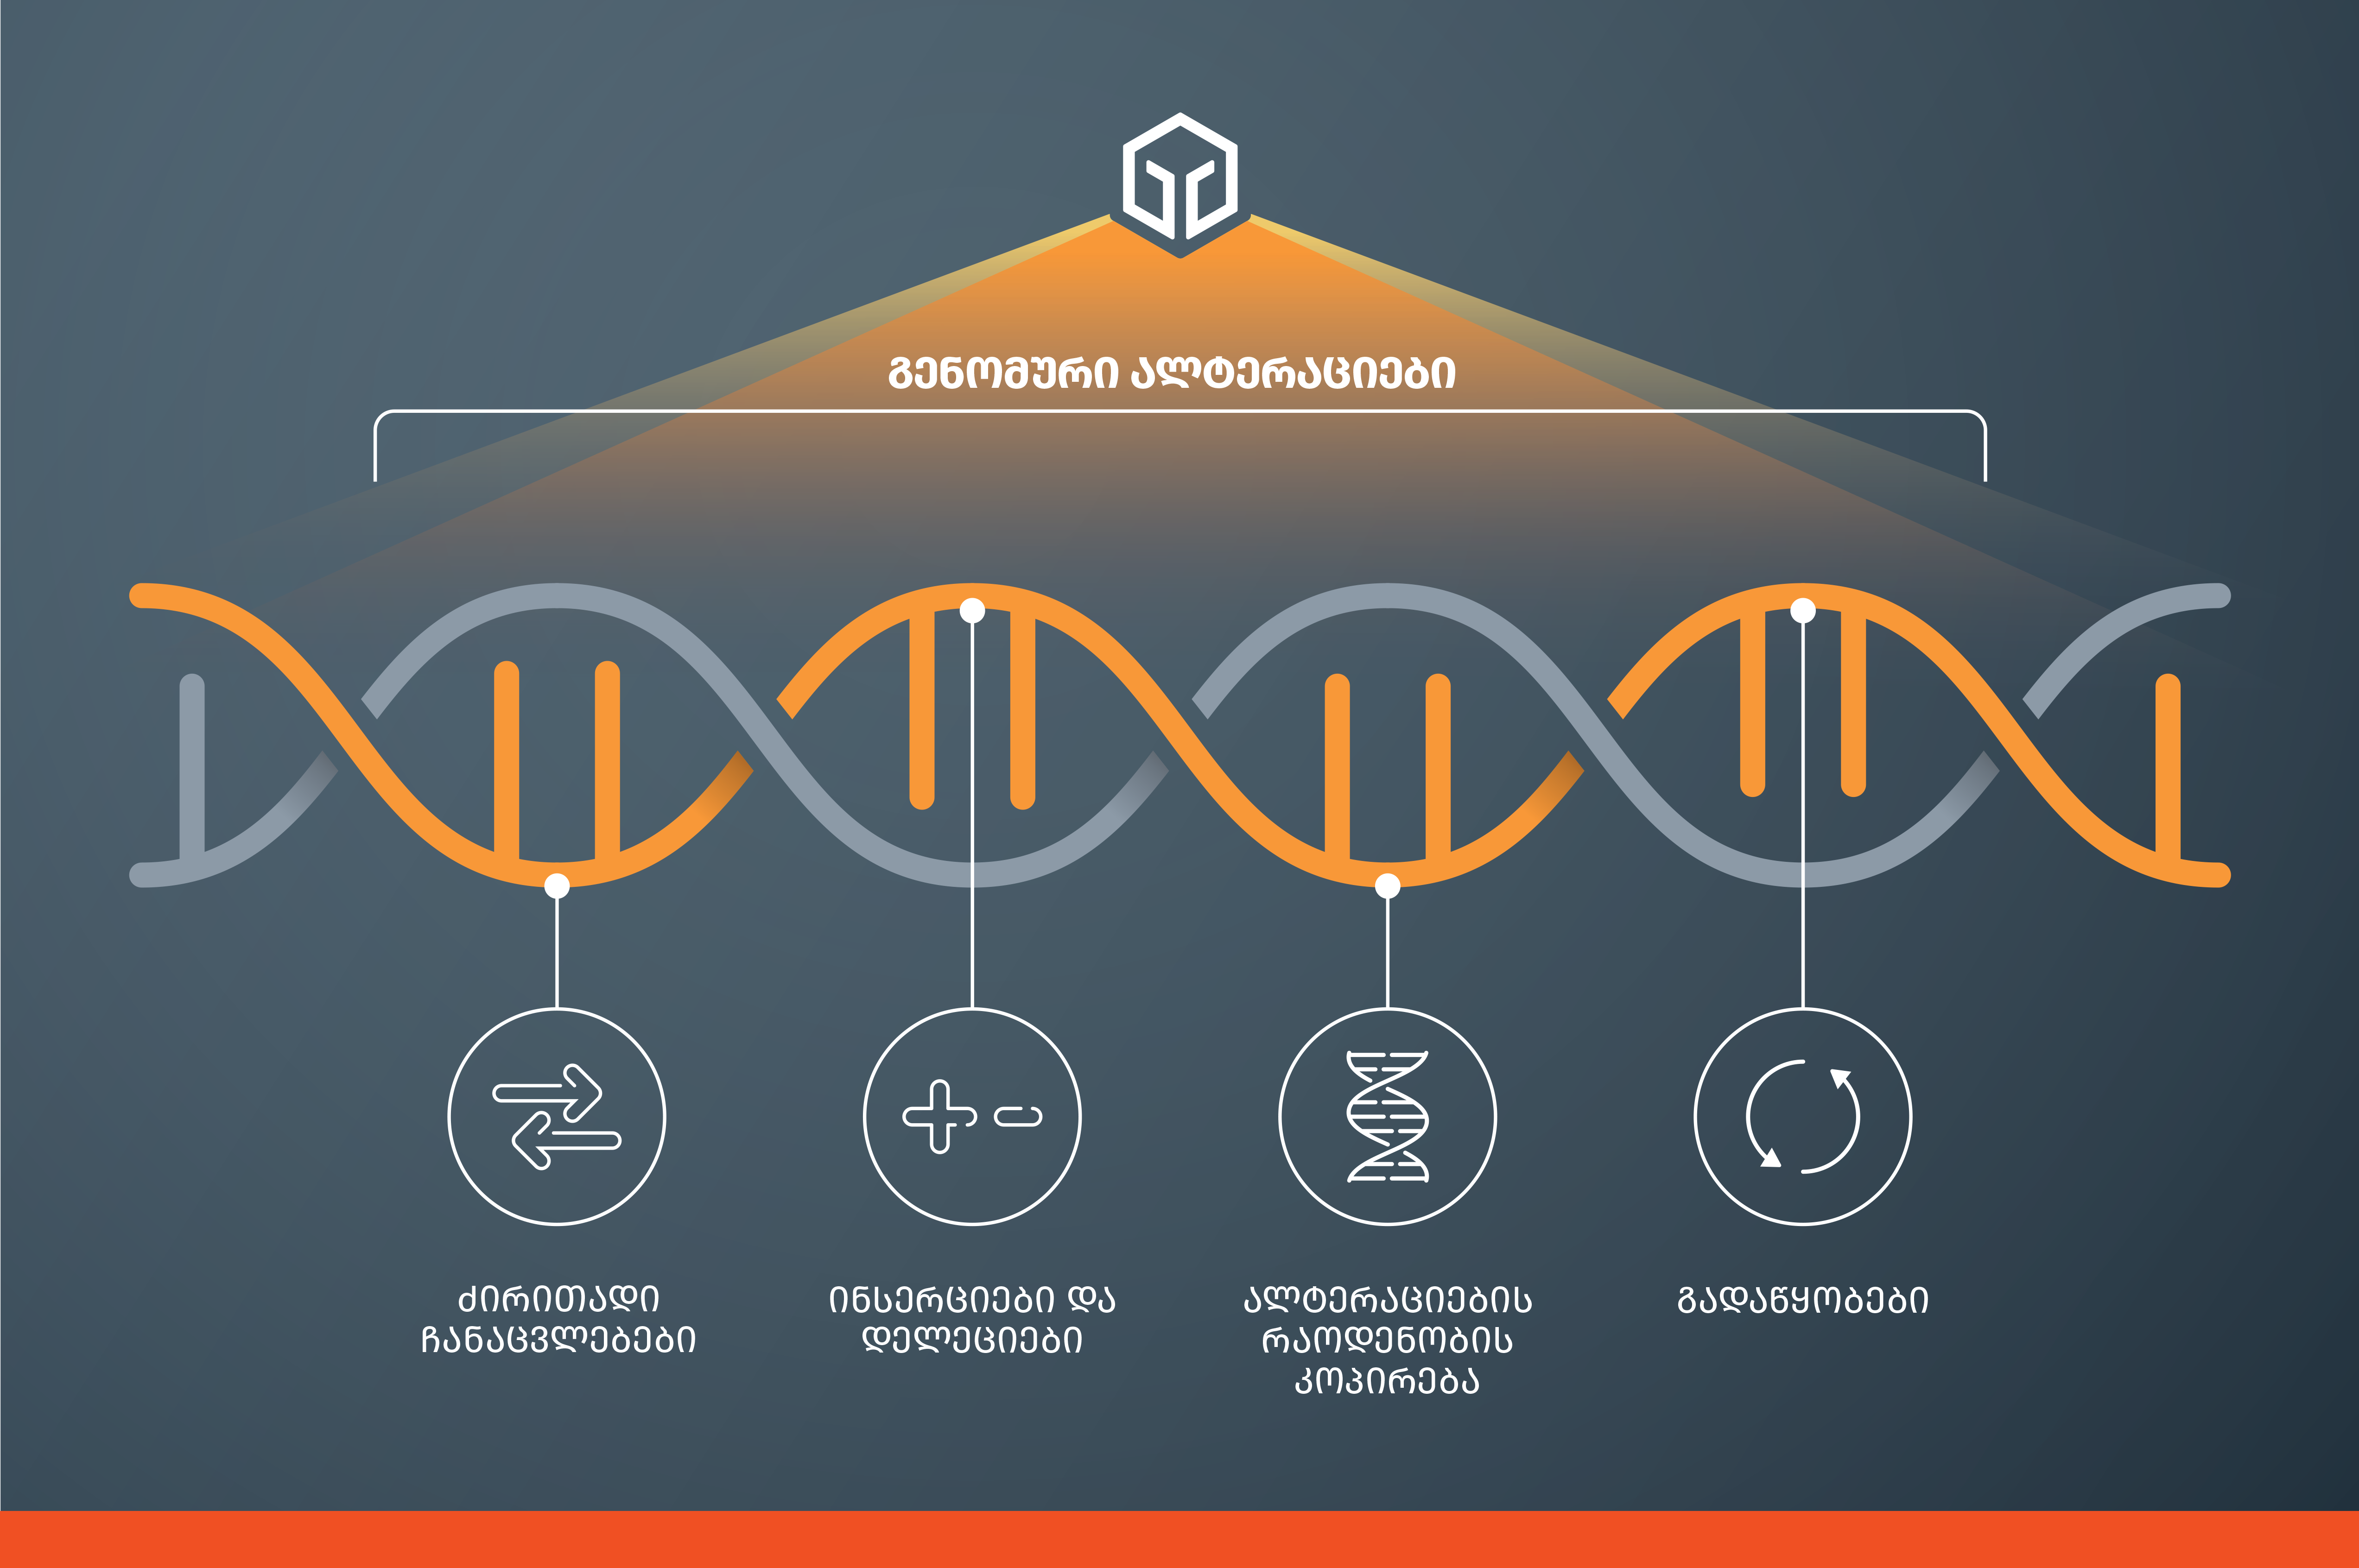 All our services use our leading comprehensive genomic profiling approach to identify clinically relevant alterations and potentially expand treatment options